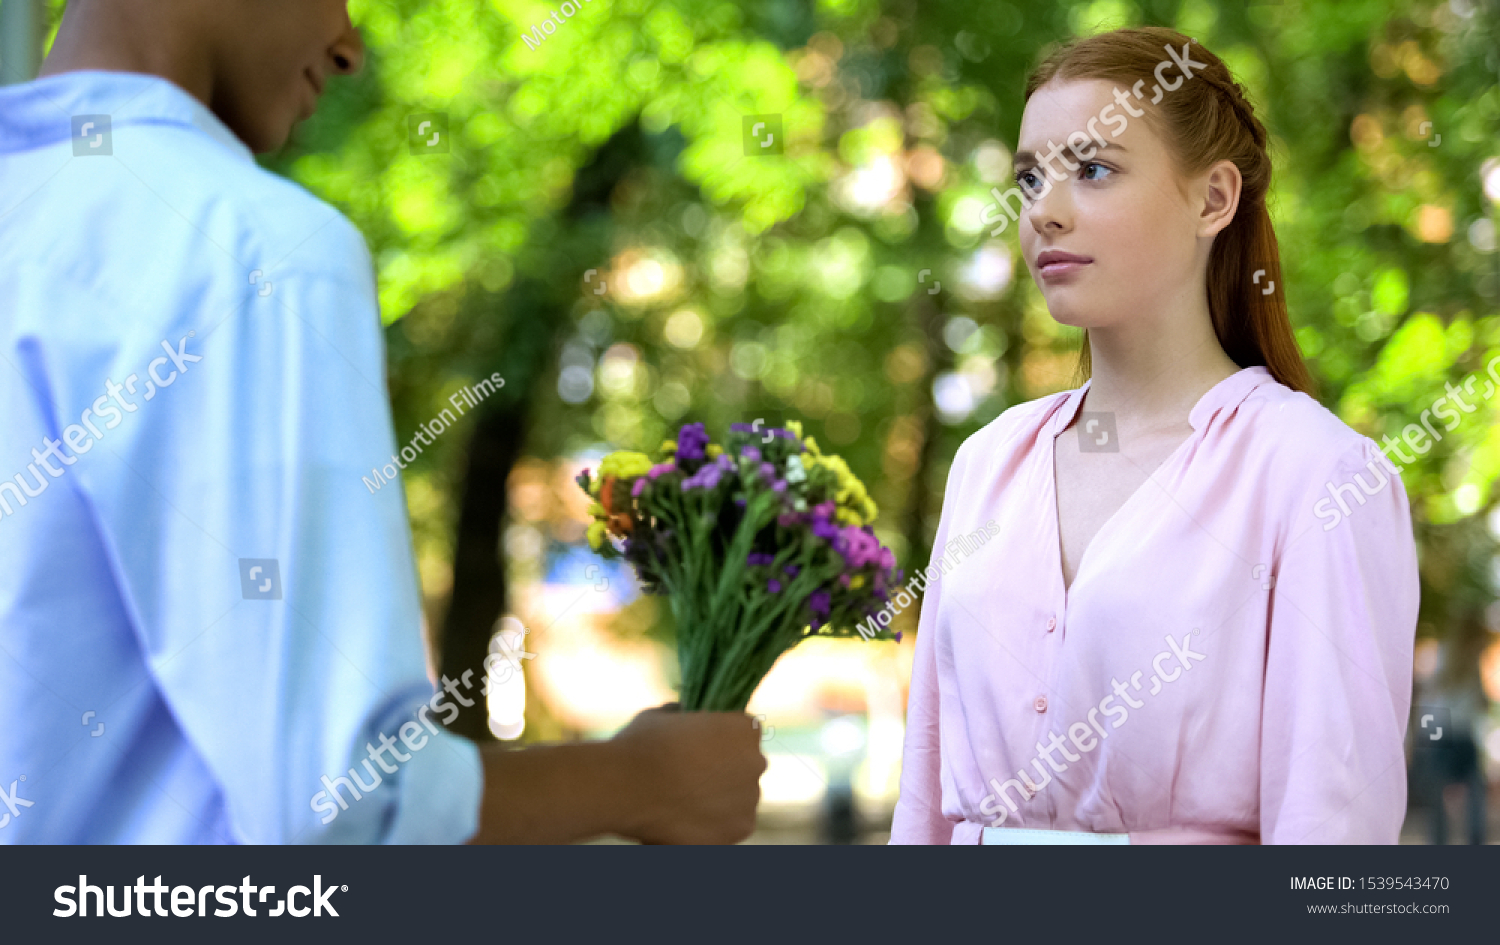 Offended girl rejecting boyfriends reconciliation attempt, ignoring flowers #1539543470